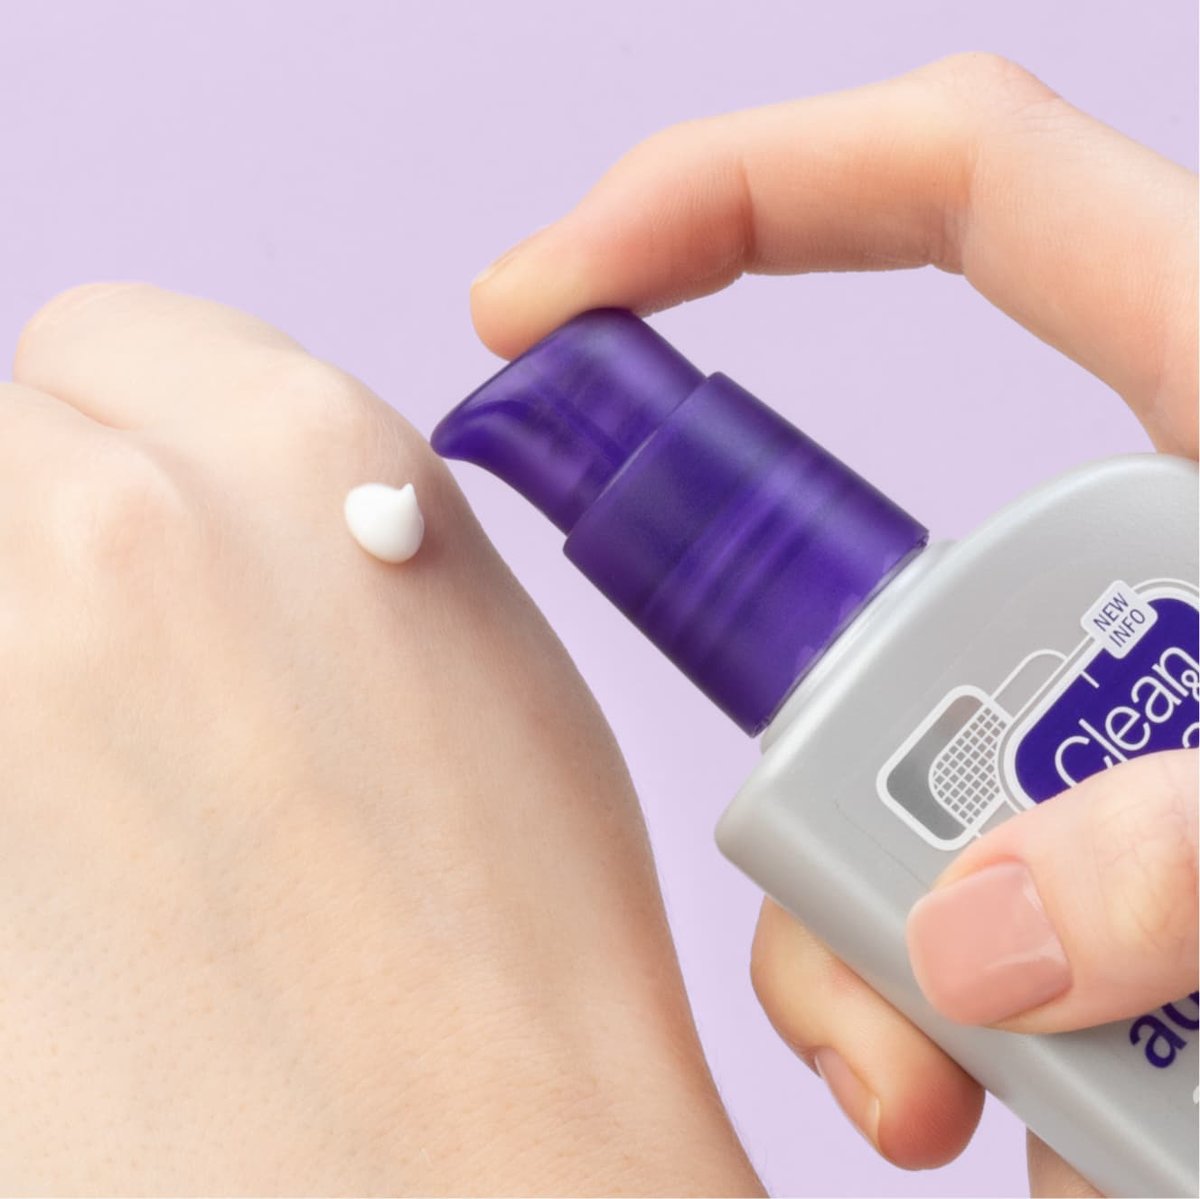 Clean & Clear Advantage oil free moisturizer applied to back of fist in front of light purple background